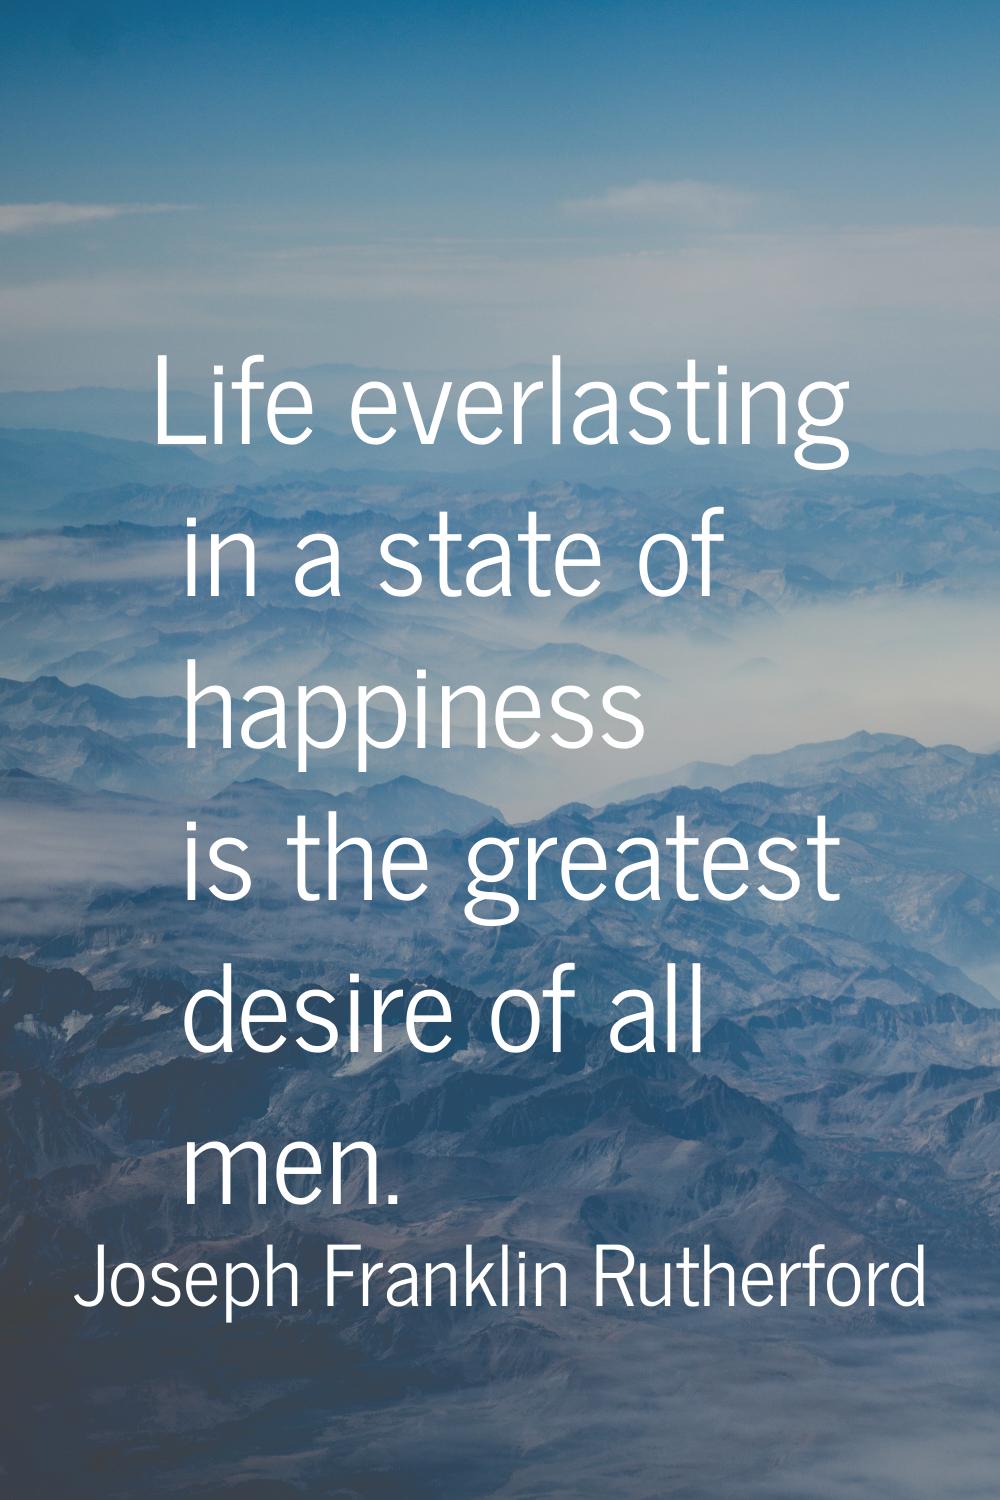 Life everlasting in a state of happiness is the greatest desire of all men.